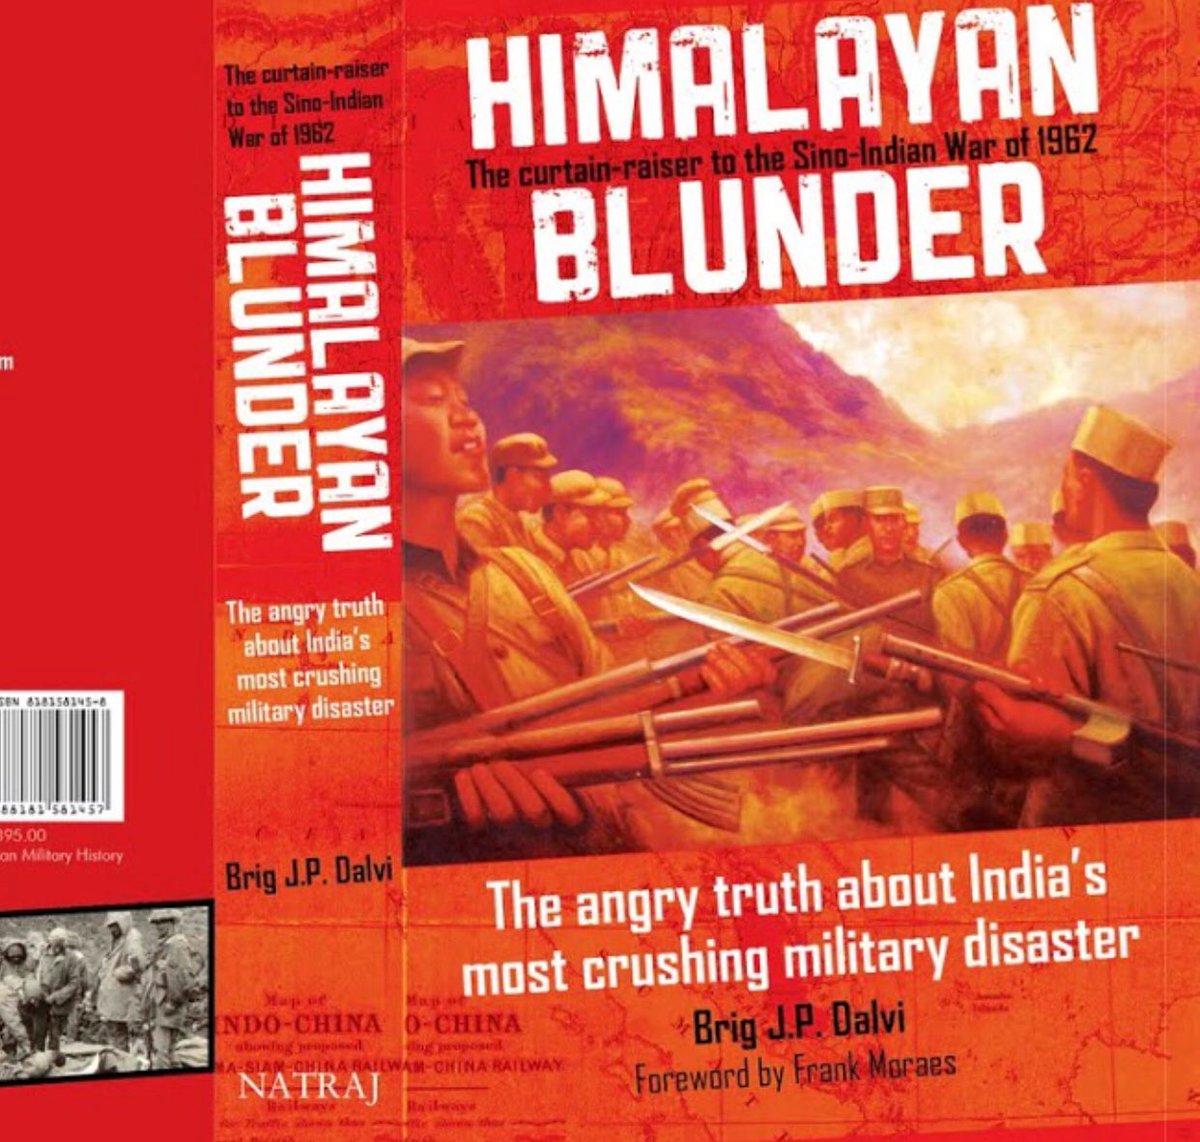 The book review — Himalayan Blunder